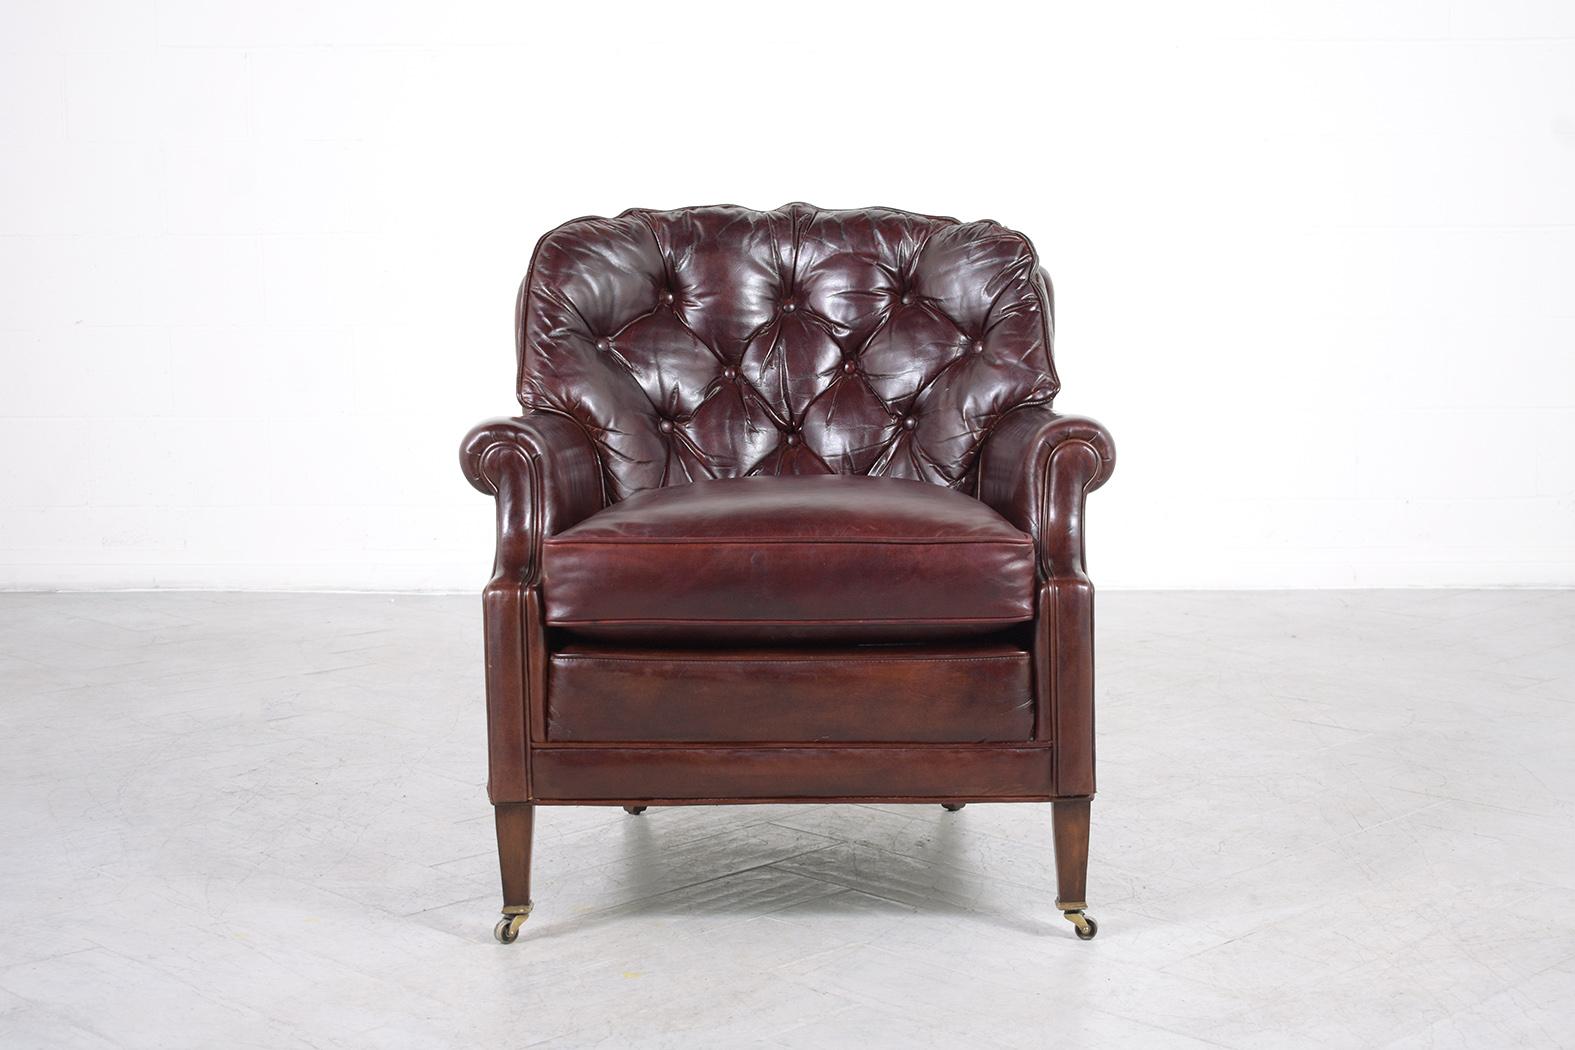 Introducing our extraordinary antique English Chesterfield lounge chair, expertly restored by our team of professional craftsmen. This stunning armchair, with its frame beautifully crafted out of wood and upholstered in fine-quality leather, is in